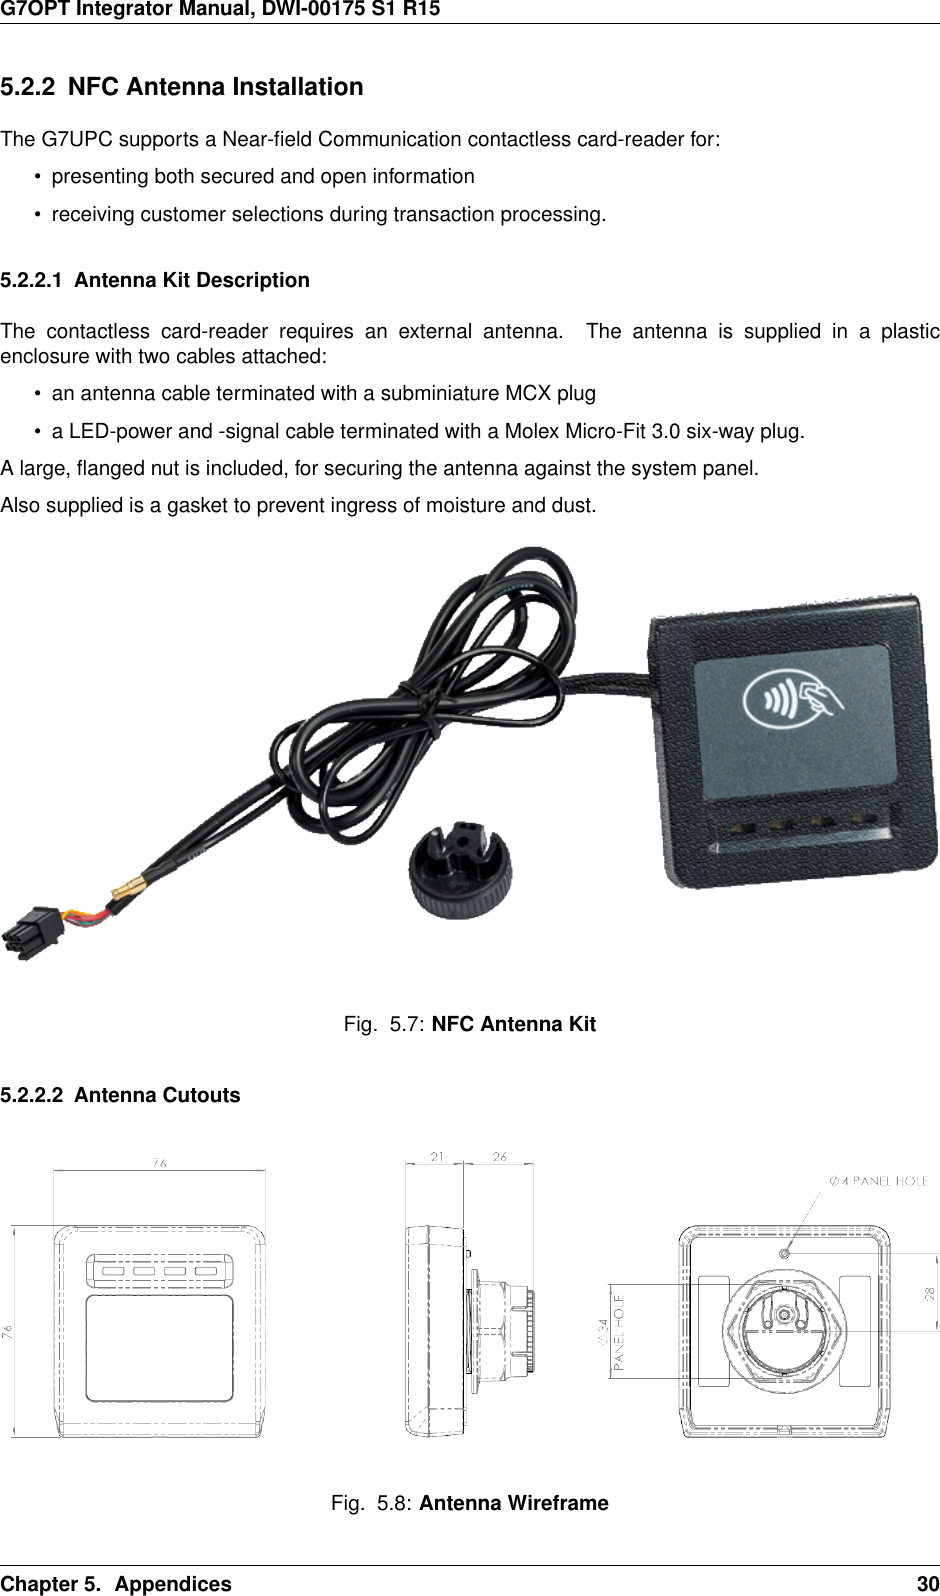 G7OPT Integrator Manual, DWI-00175 S1 R155.2.2 NFC Antenna InstallationThe G7UPC supports a Near-ﬁeld Communication contactless card-reader for:• presenting both secured and open information• receiving customer selections during transaction processing.5.2.2.1 Antenna Kit DescriptionThe contactless card-reader requires an external antenna. The antenna is supplied in a plasticenclosure with two cables attached:• an antenna cable terminated with a subminiature MCX plug• a LED-power and -signal cable terminated with a Molex Micro-Fit 3.0 six-way plug.A large, ﬂanged nut is included, for securing the antenna against the system panel.Also supplied is a gasket to prevent ingress of moisture and dust.Fig. 5.7: NFC Antenna Kit5.2.2.2 Antenna CutoutsFig. 5.8: Antenna WireframeChapter 5. Appendices 30